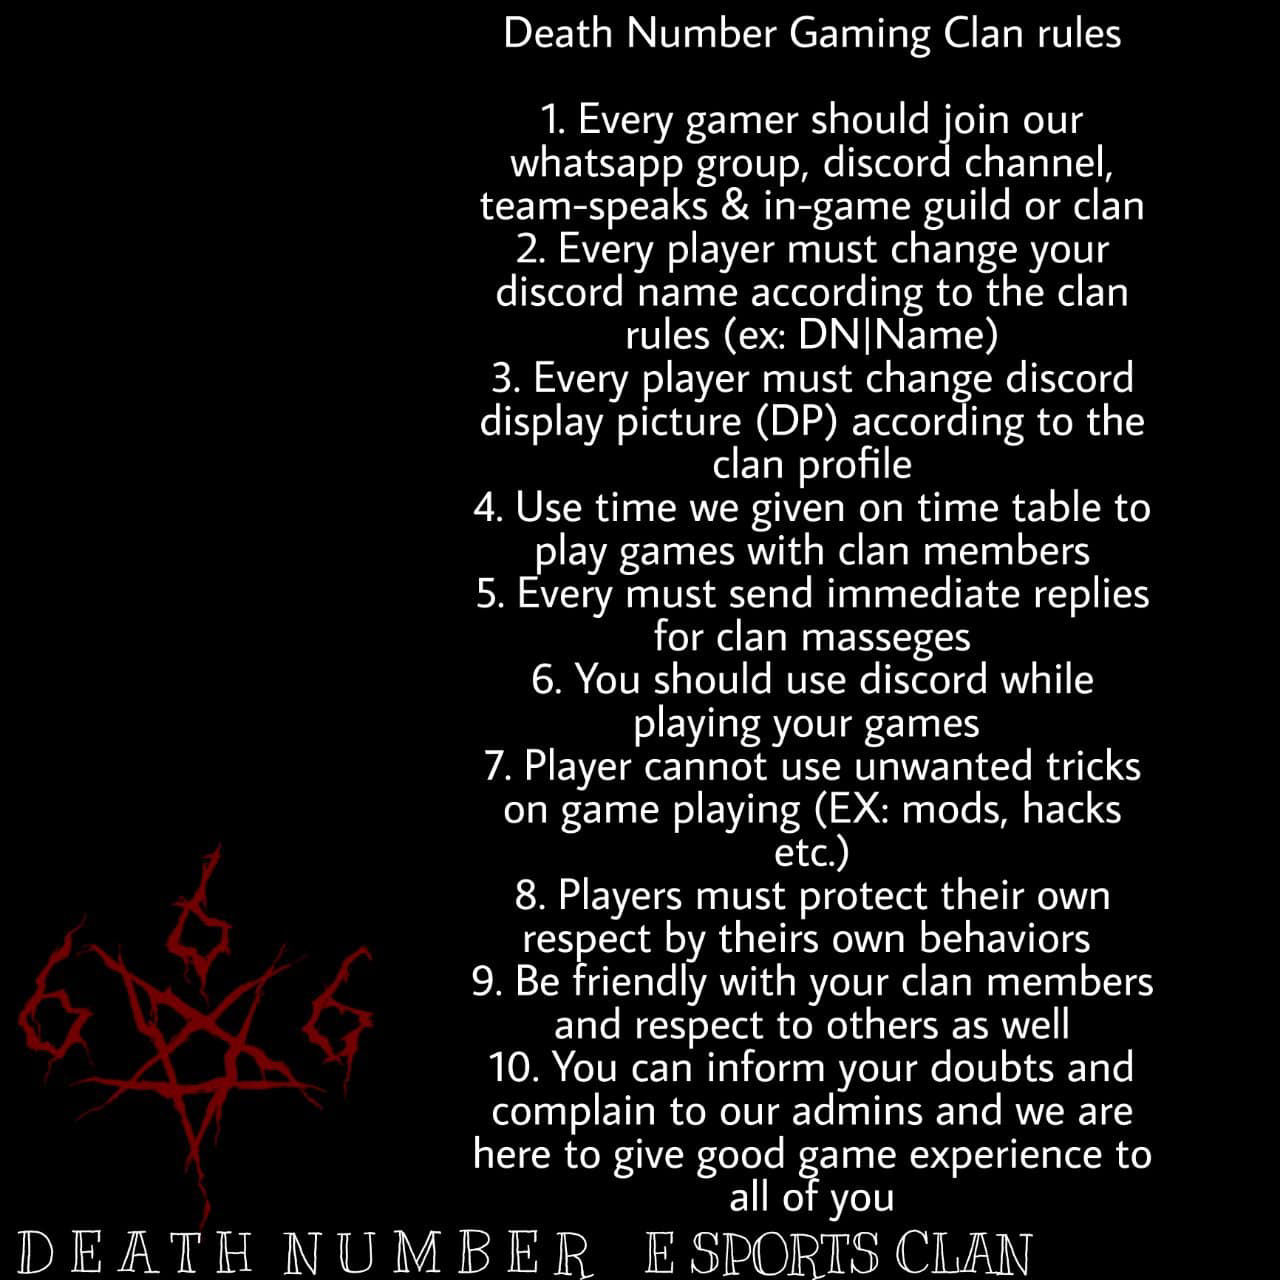 CLAN RULES